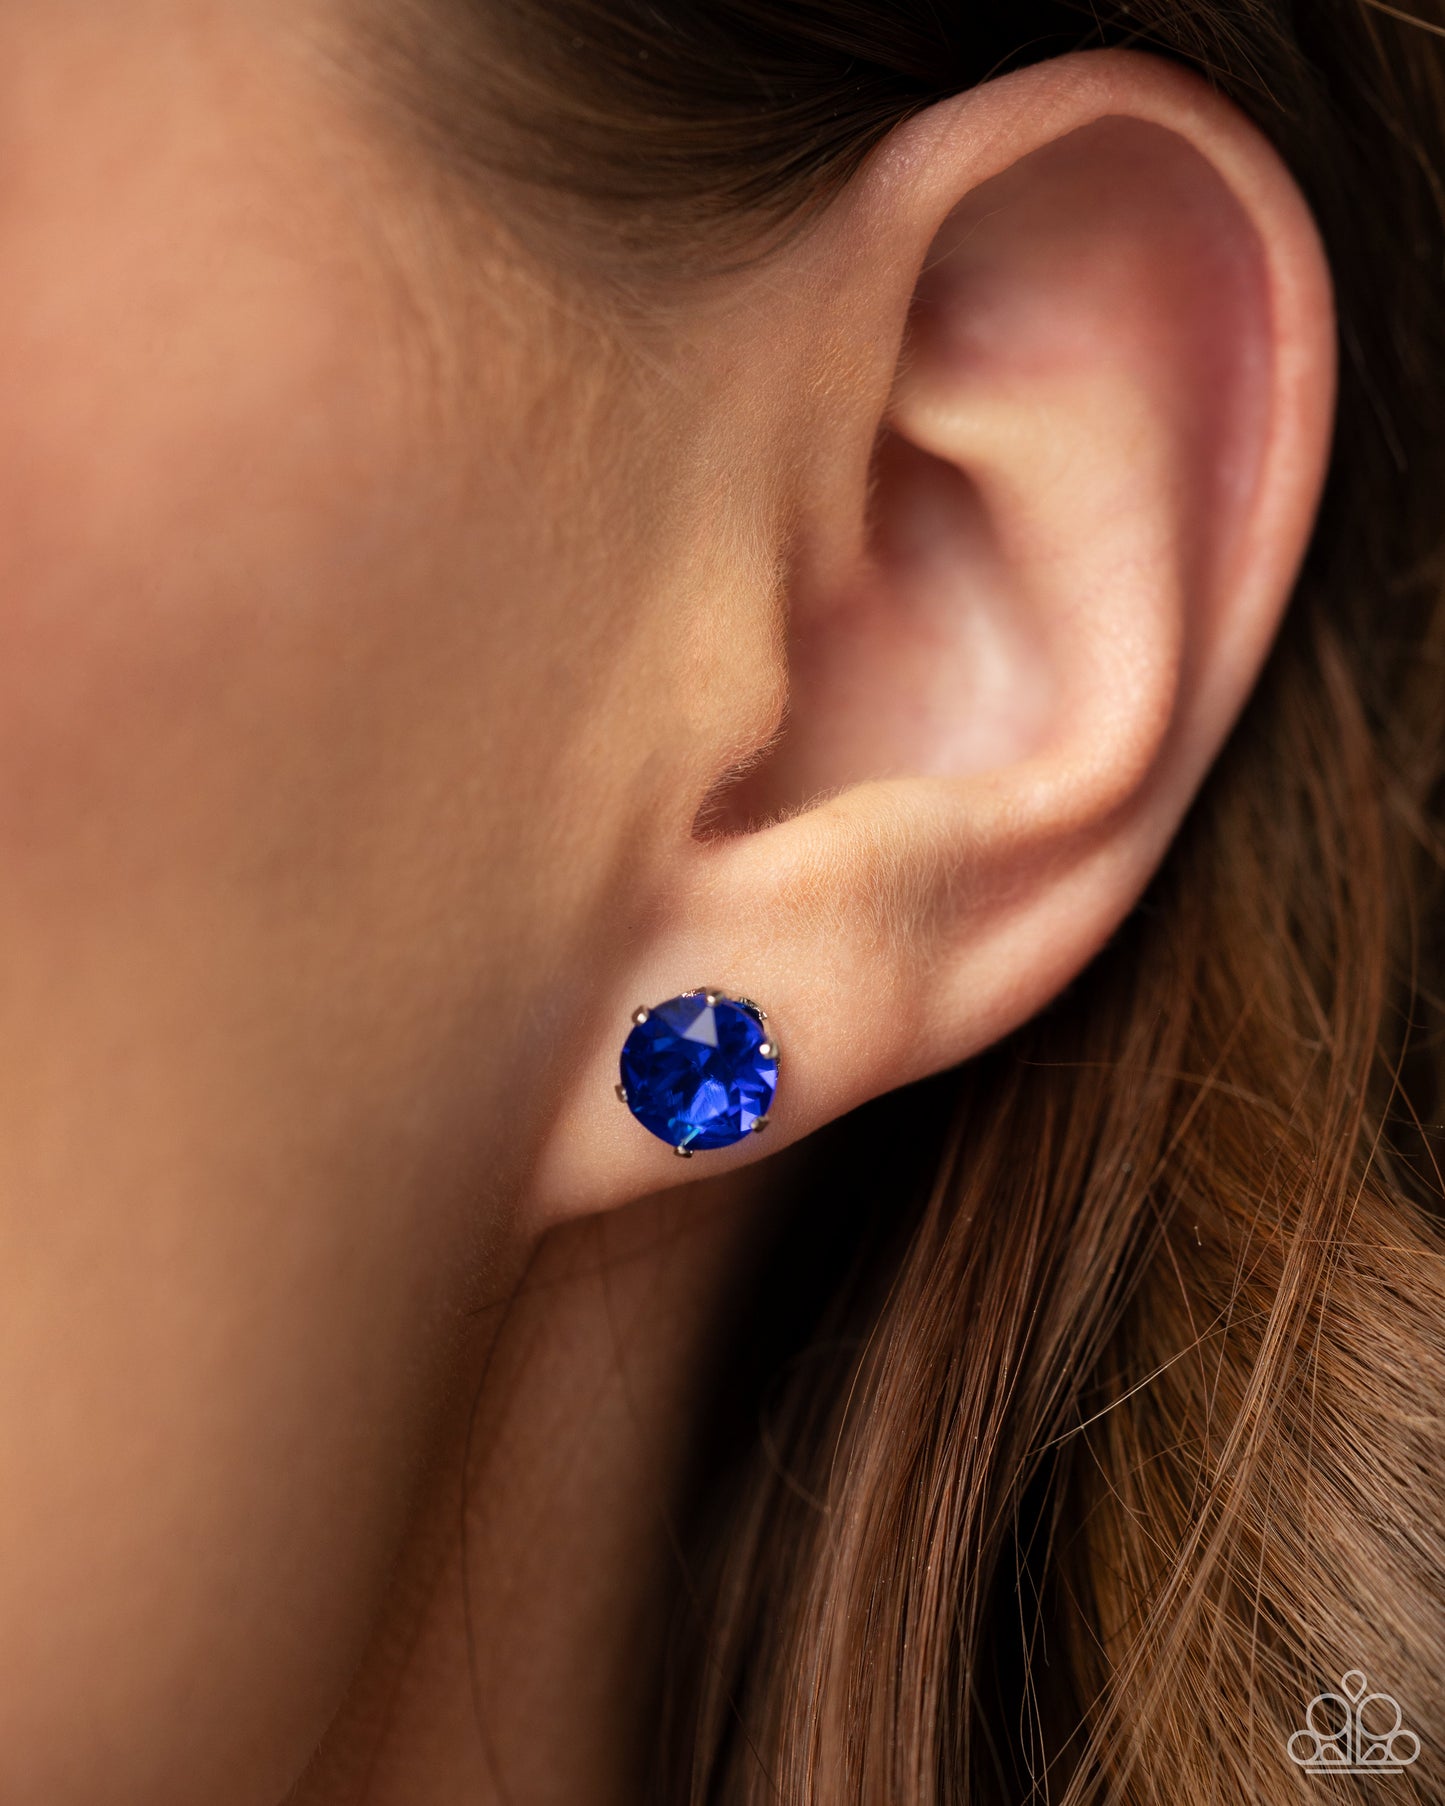 Breathtaking Birthstone Sapphire Blue Post Earring - Paparazzi Accessories  A sparkling sapphire rhinestone is nestled inside a classic silver frame for a beautiful birthstone-inspired display. Earring attaches to a standard post fitting.  Sold as one pair of post earrings.  P5PO-BLXX-174UD